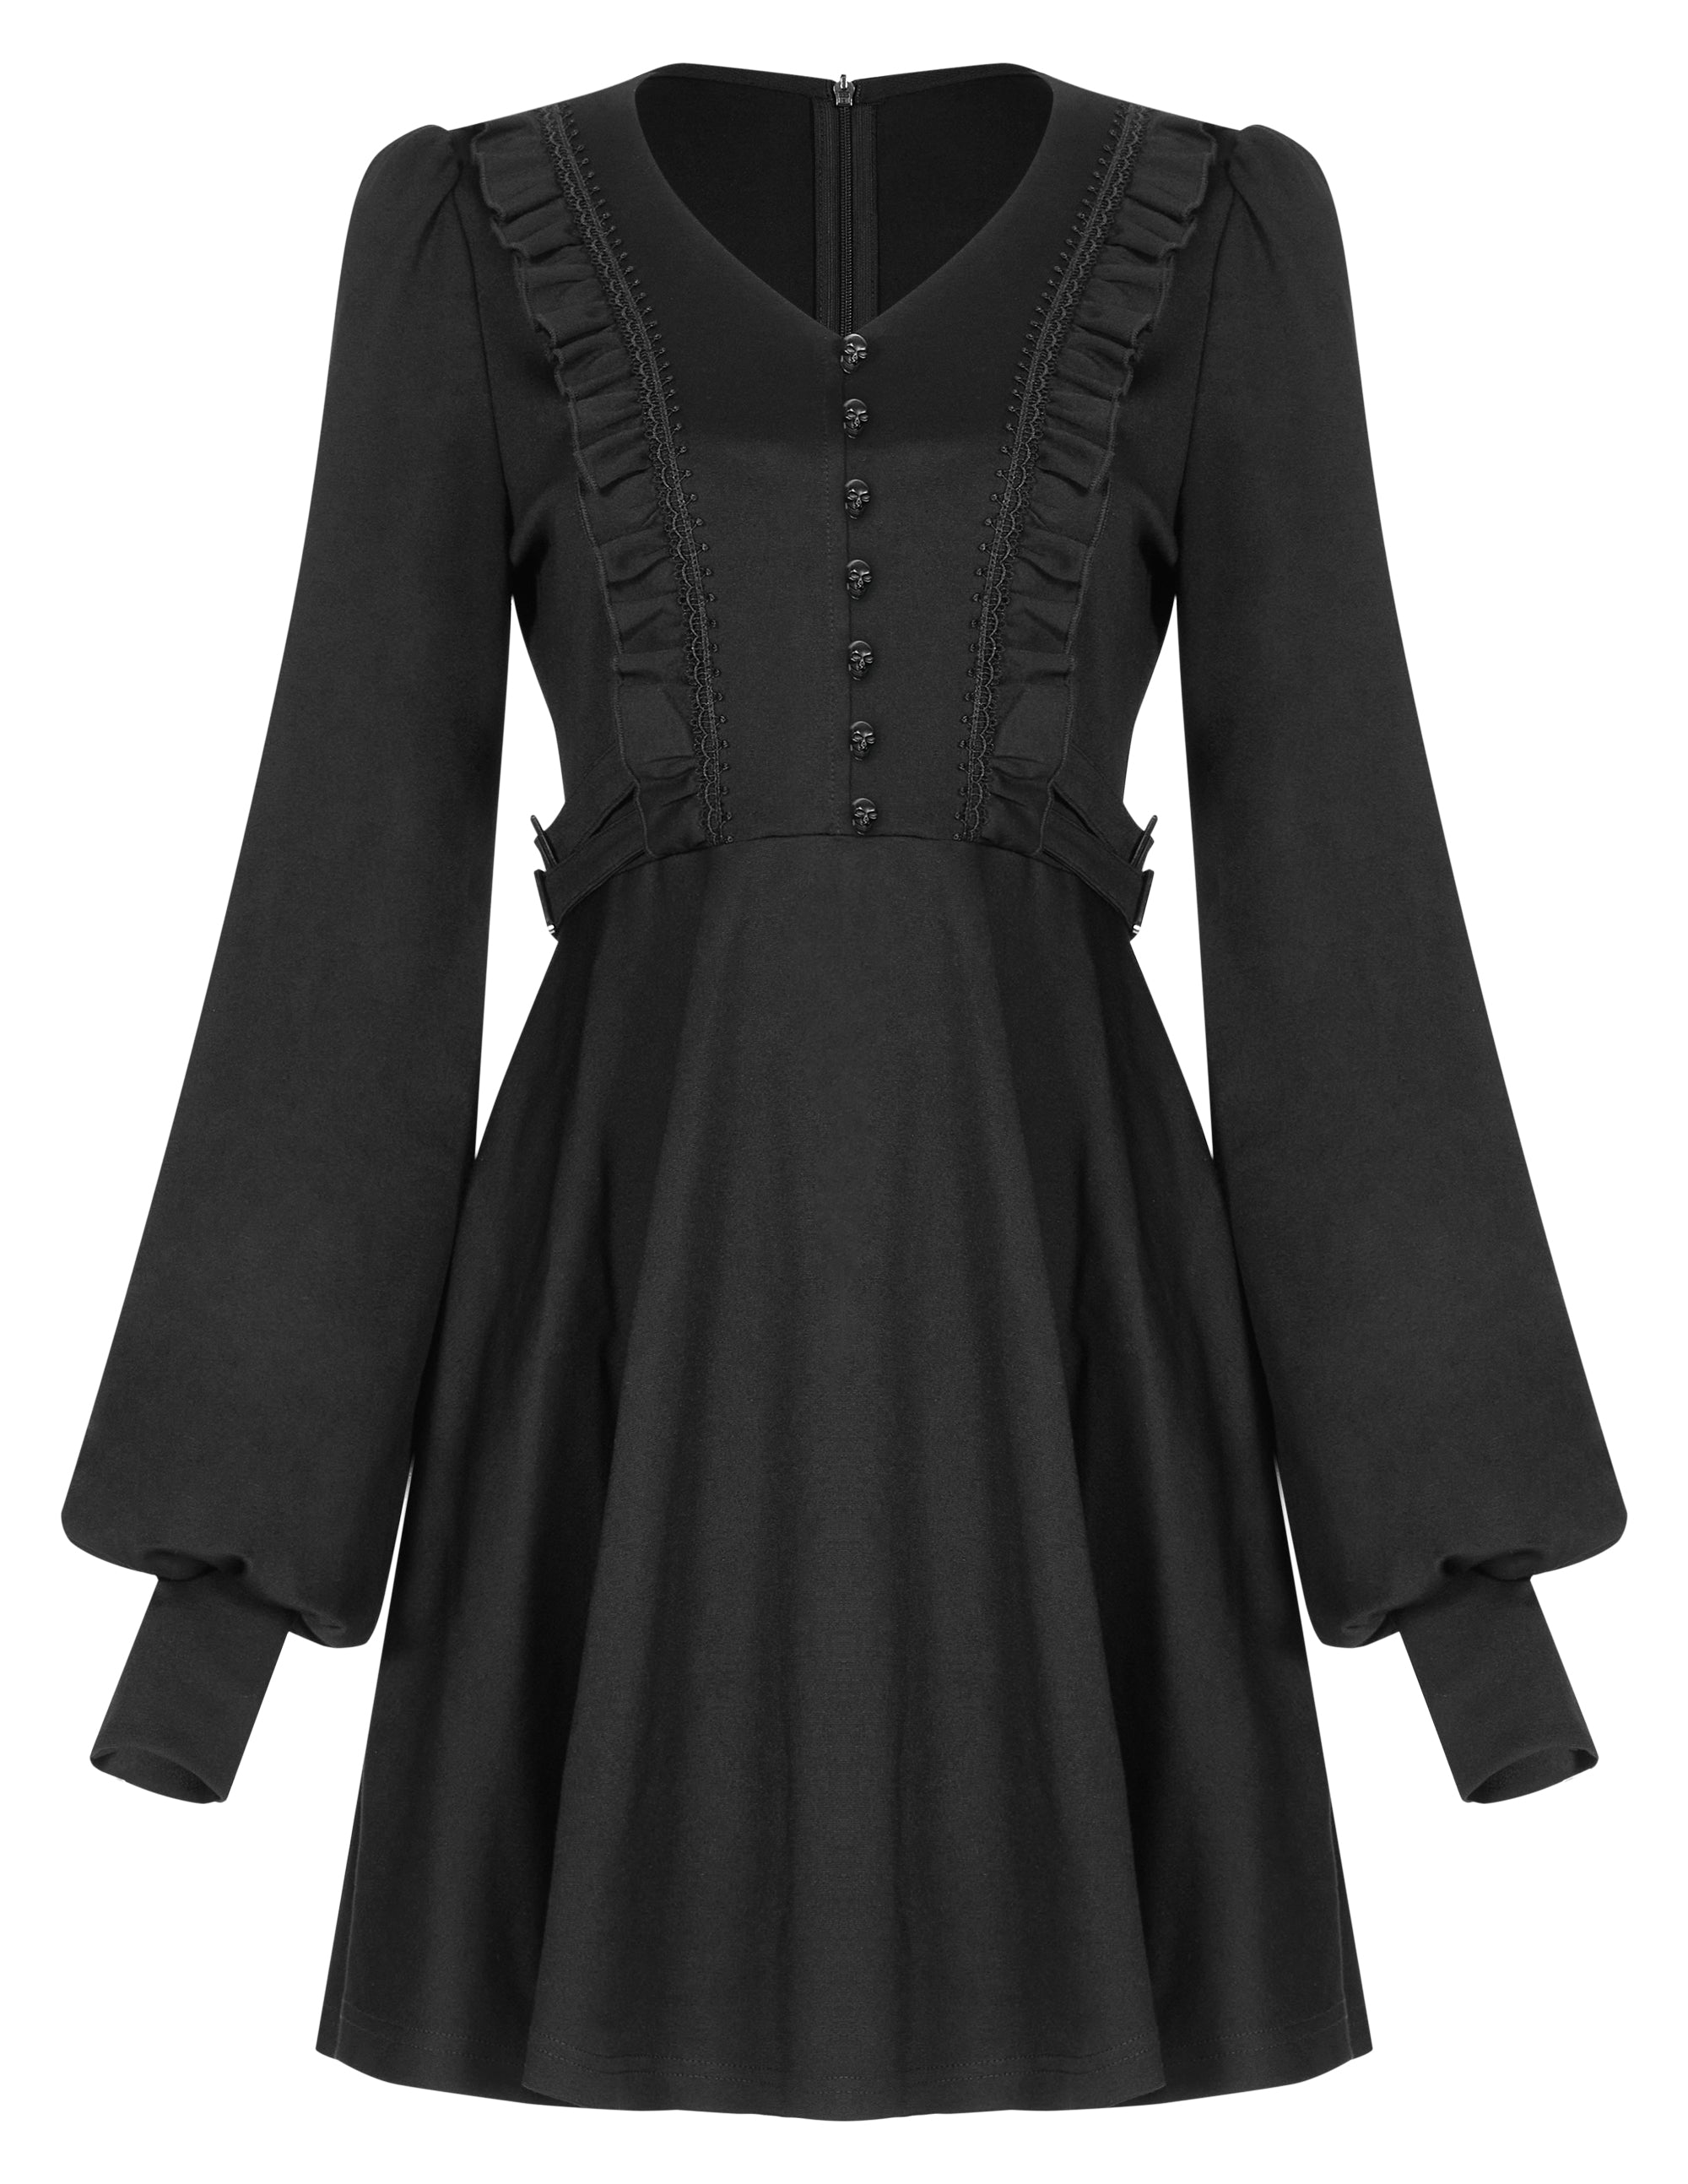 The Haunted Hollow Dress | Goth Mall